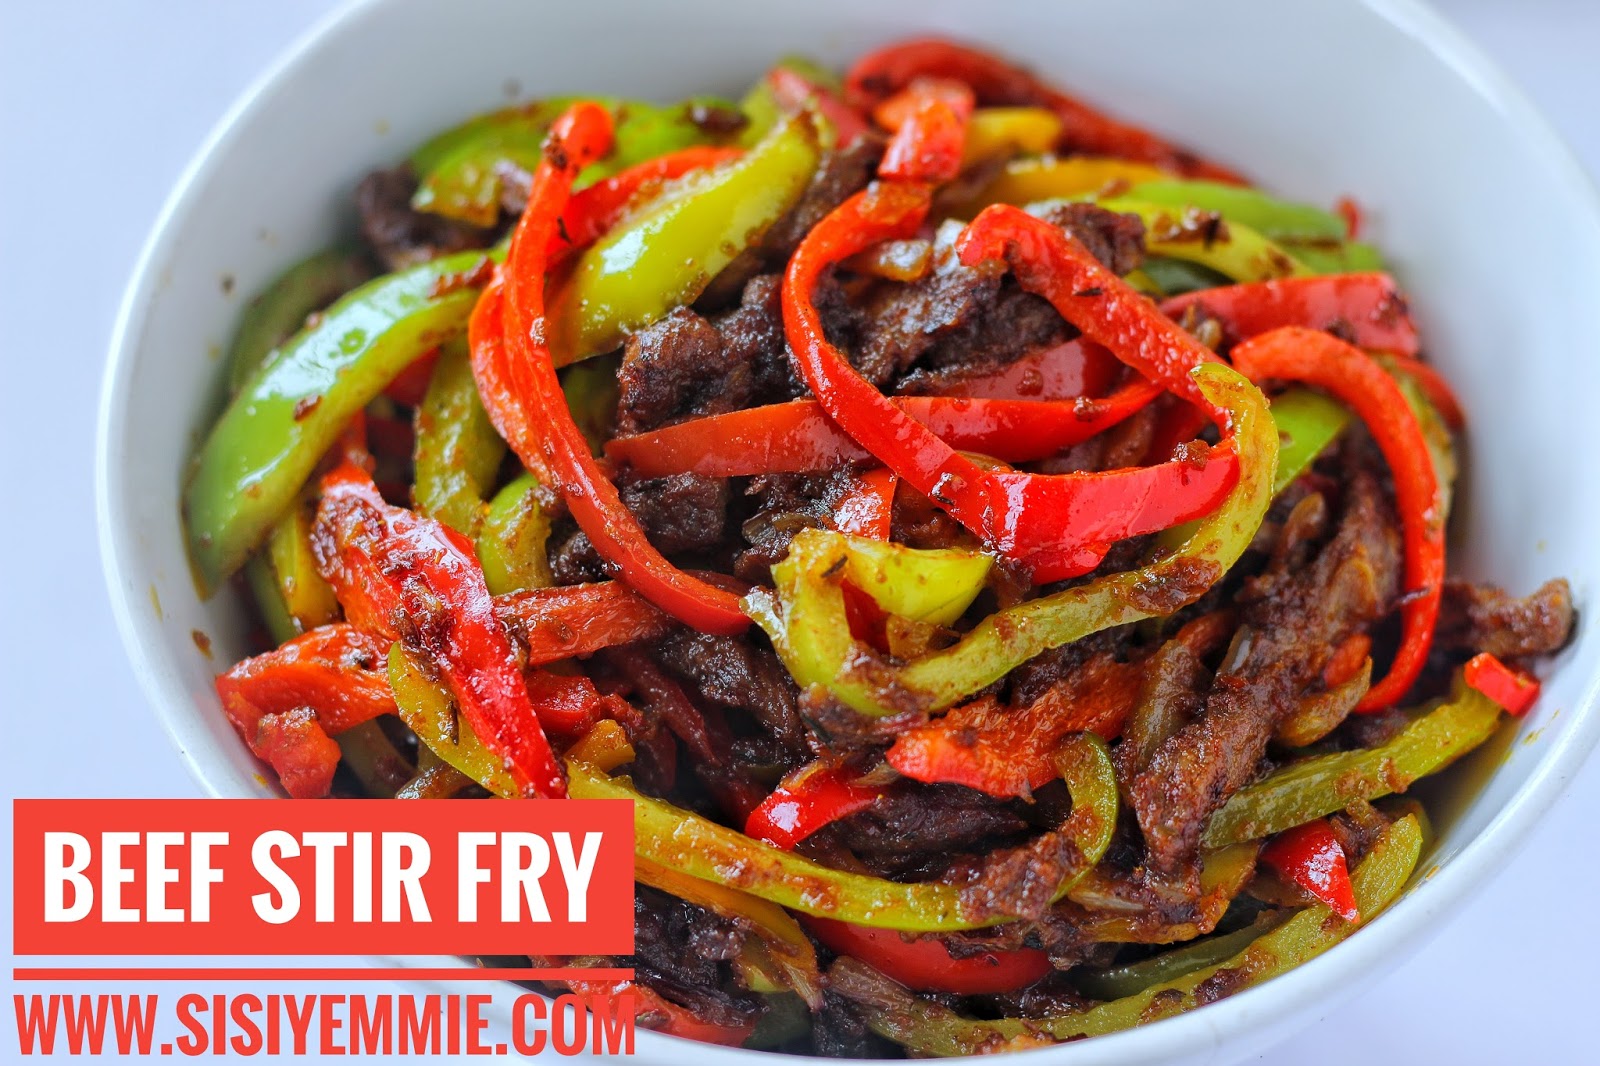 SPICY BEEF STIR FRY + GIVEAWAY! pic